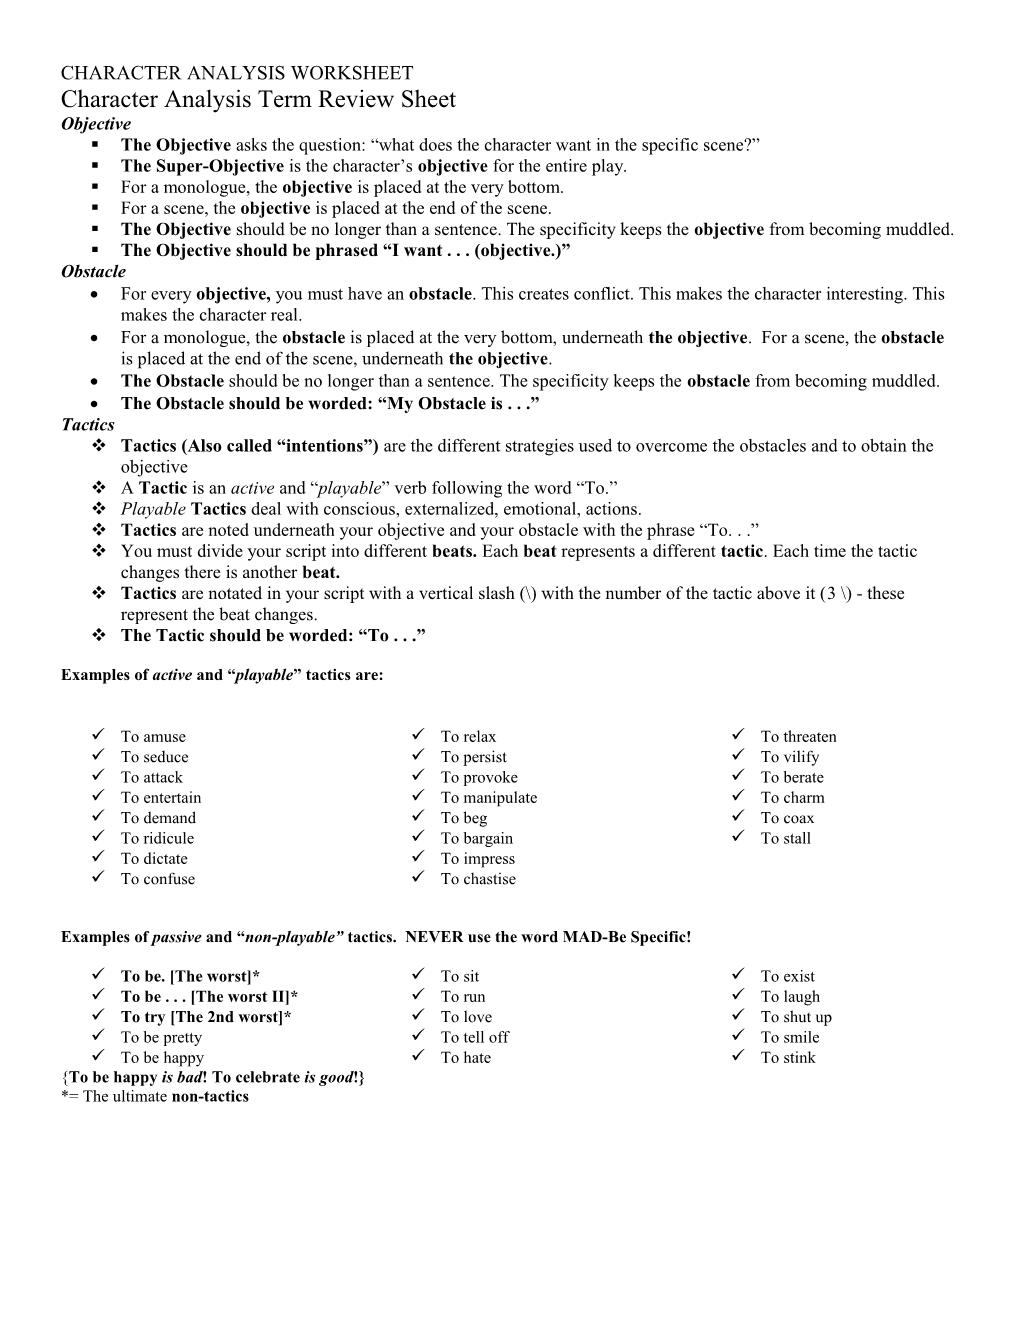 Character Analysis Term Review Sheet